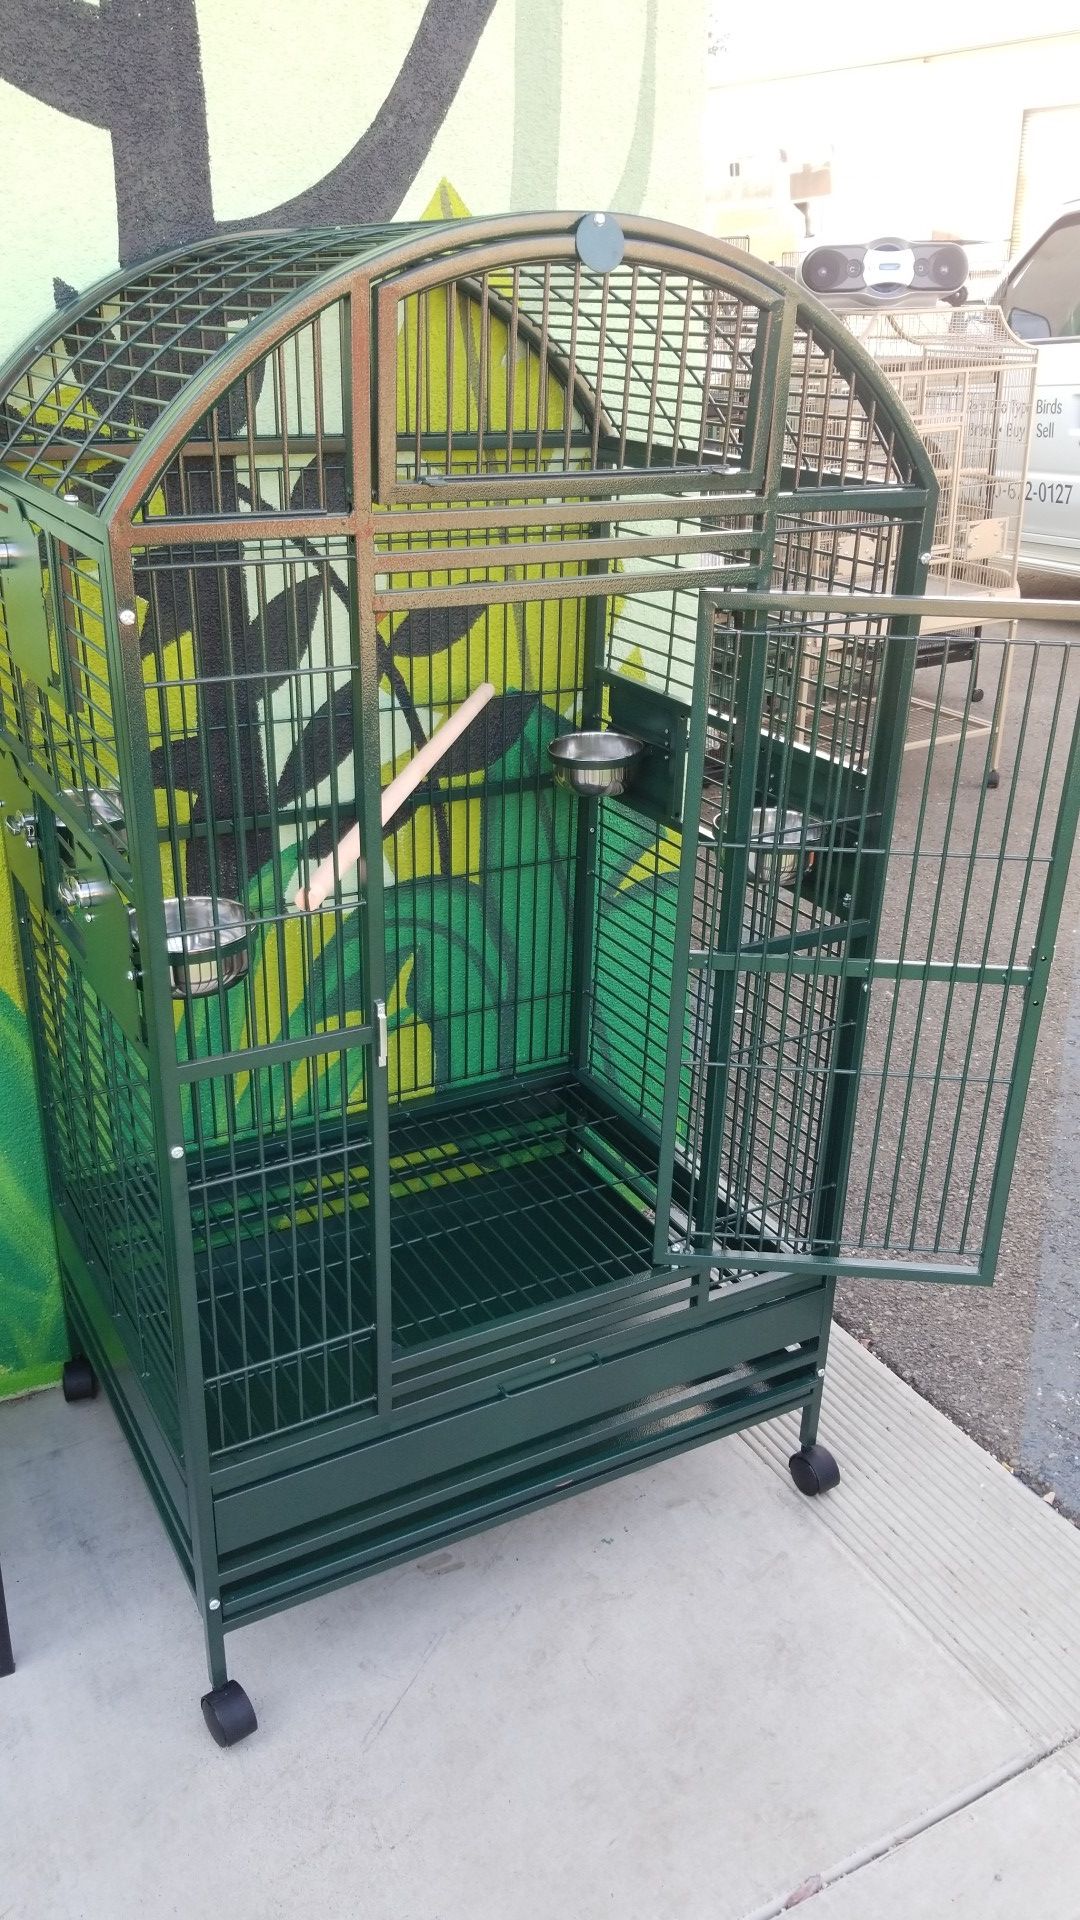 Wrought Iron Parrot bird cage, dome top